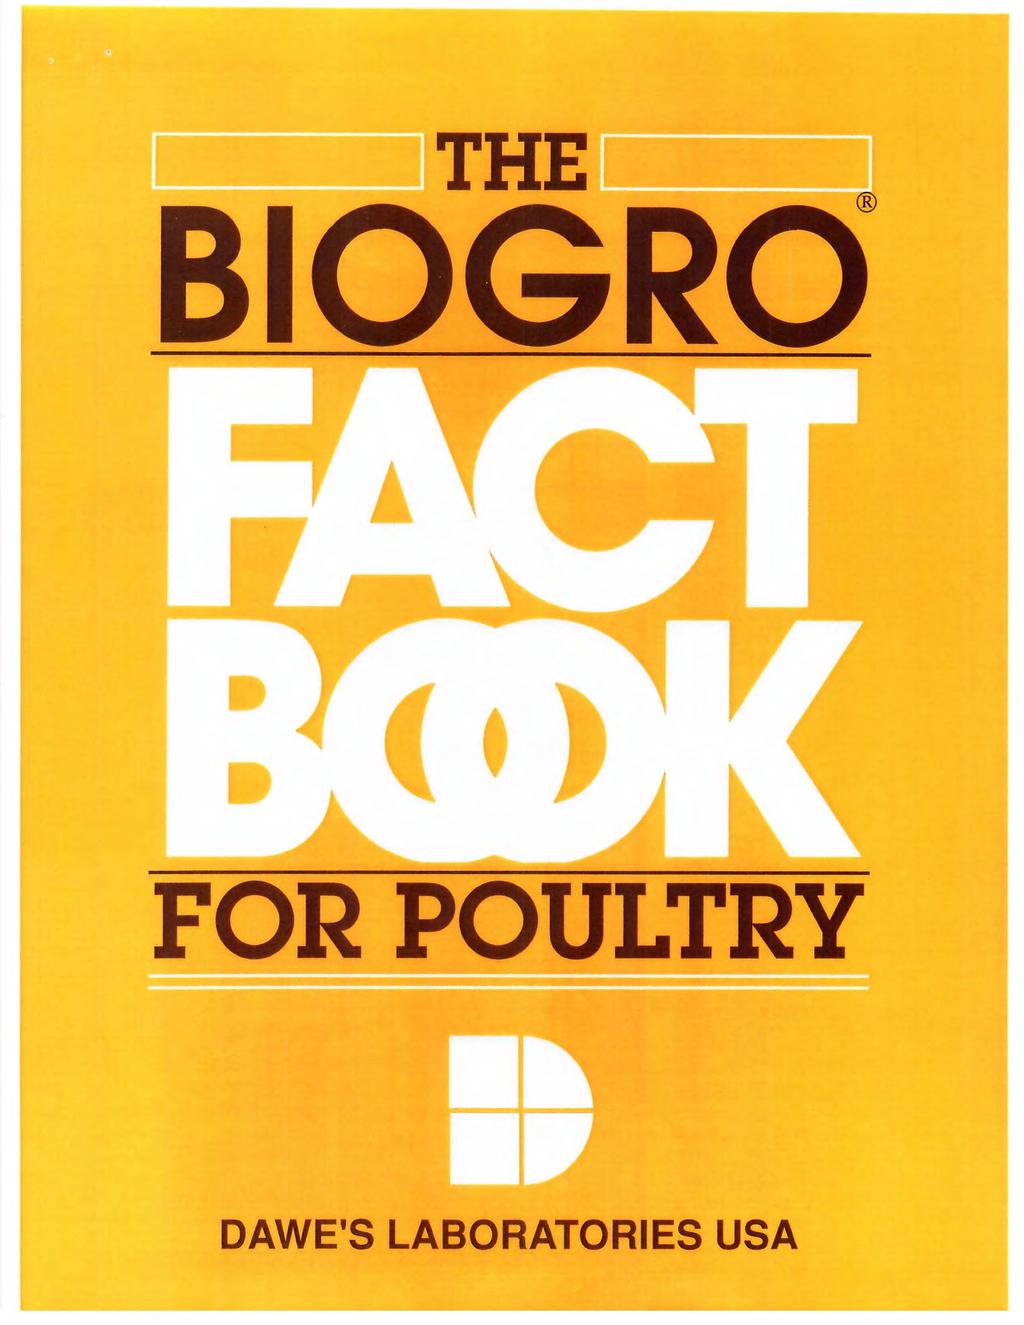 ( 1 ) FOR POULTRY